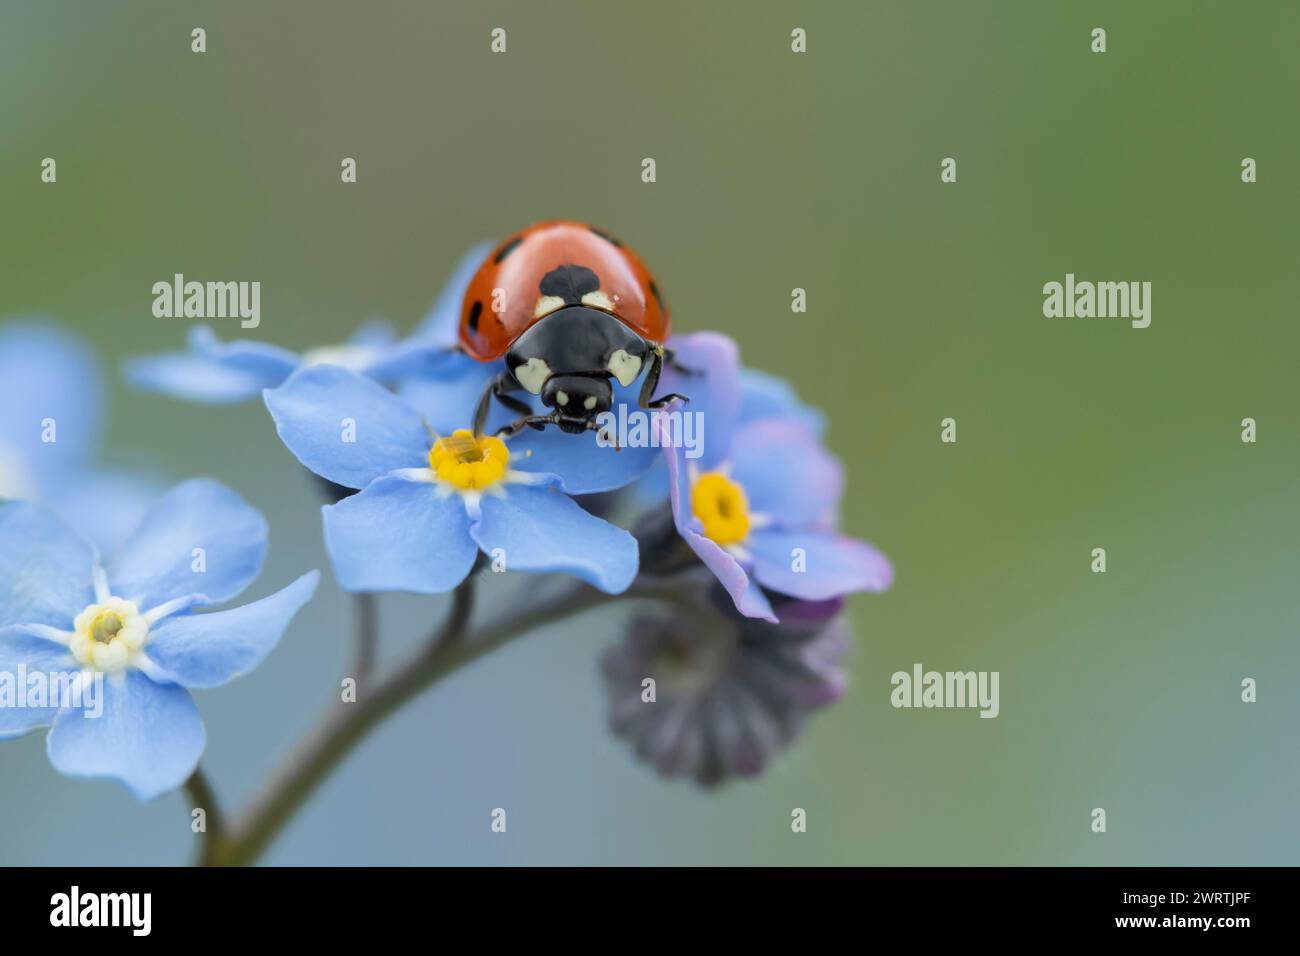 Seven-spot ladybird (Coccinella septempunctata) adult insect on a Forget-me-not flower, Suffolk, England United Kingdom Stock Photo